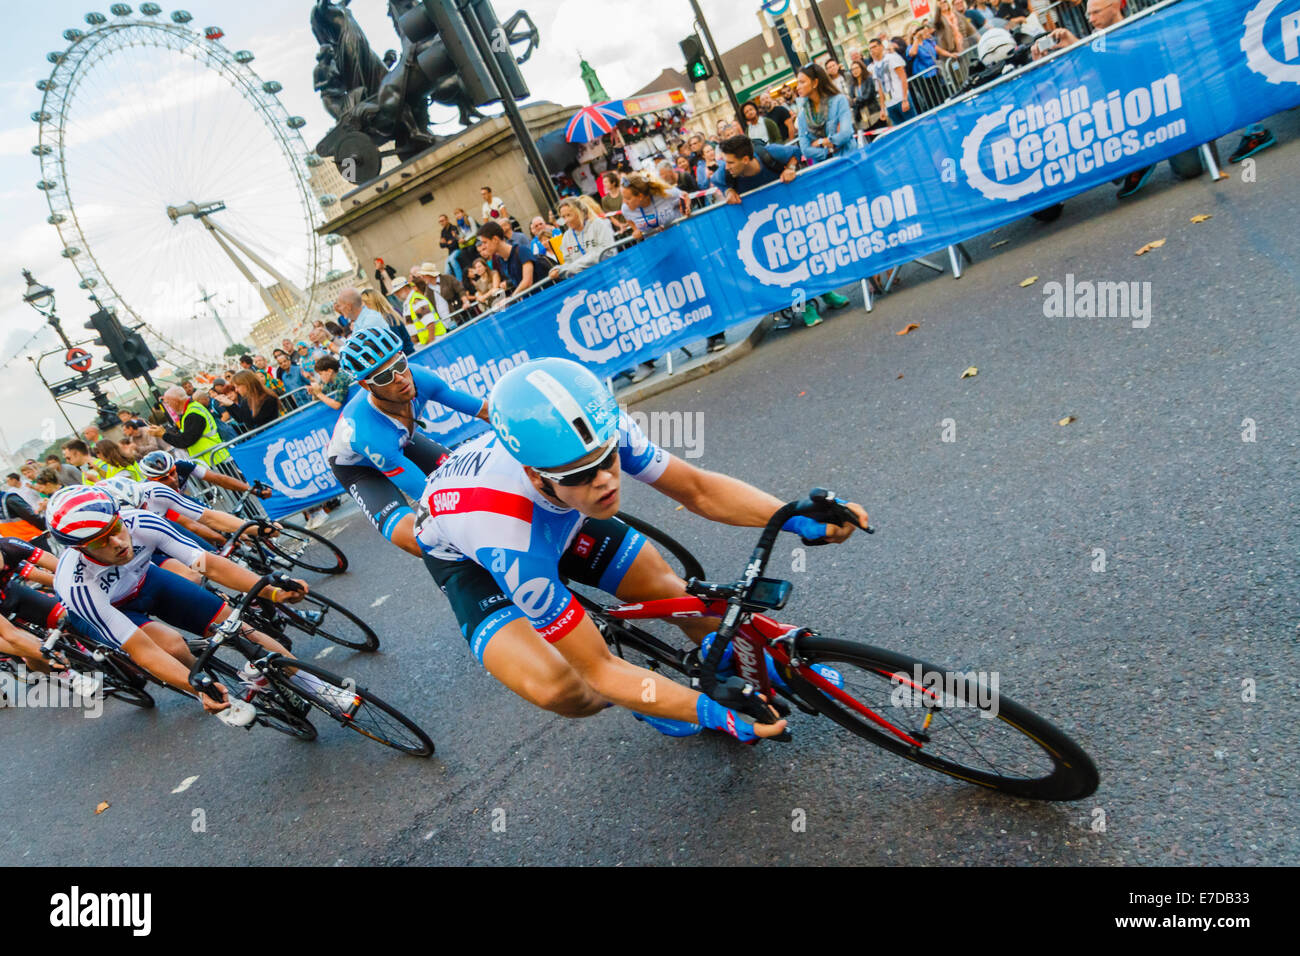 London, UK. 14th September 2014. Riders compete in the final stage of the Tour of Britain cycle race in central London. Stock Photo